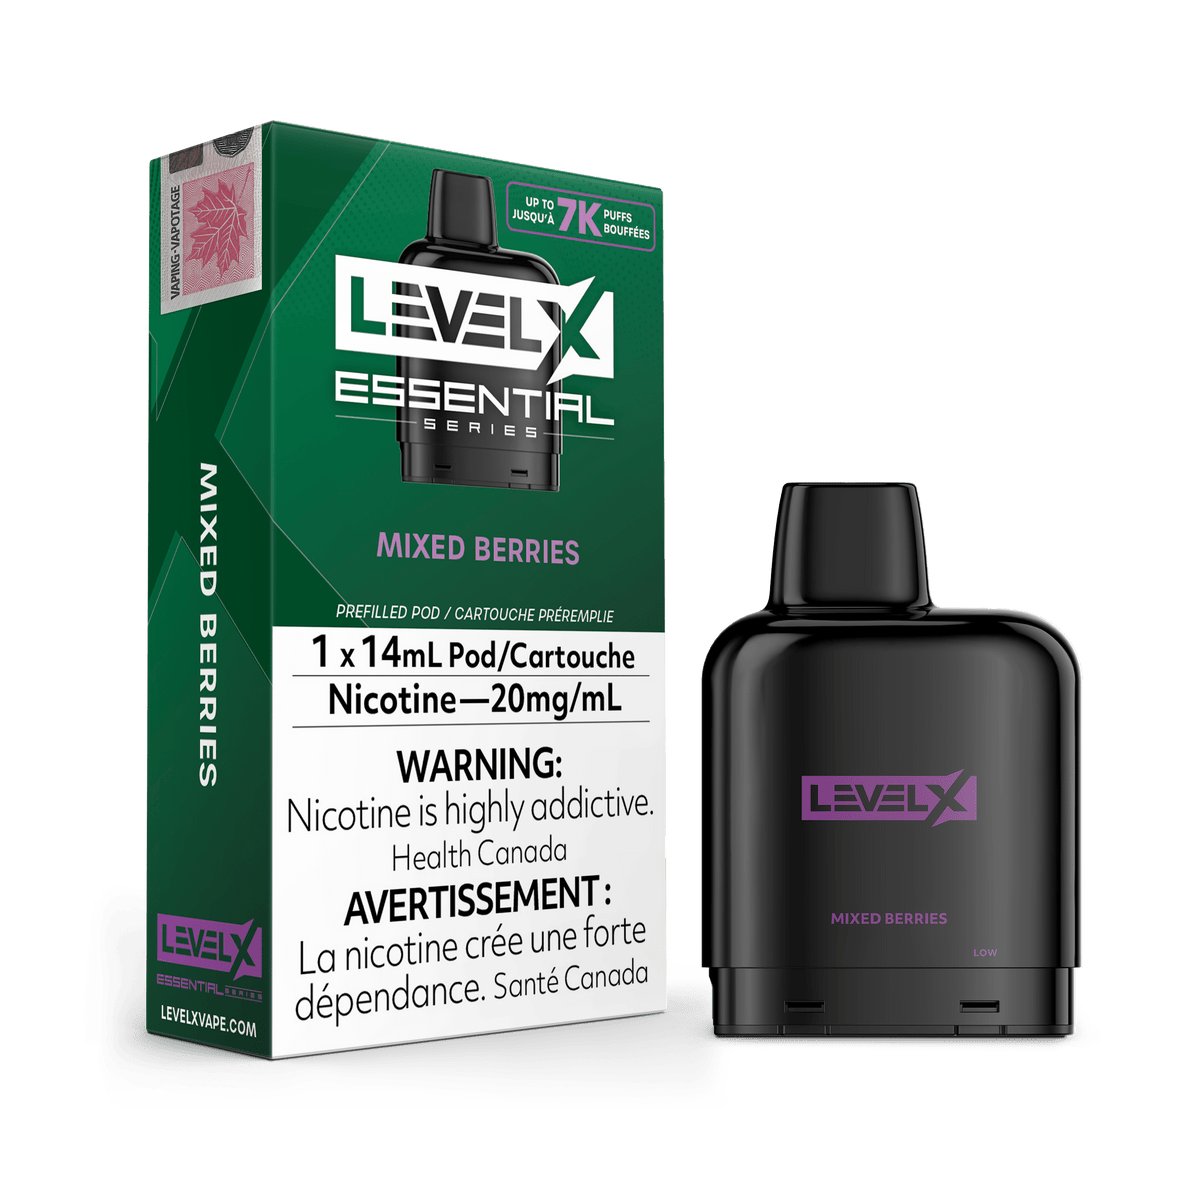 Level X Essential Series Pod - Mixed Berries available on Canada online vape shop